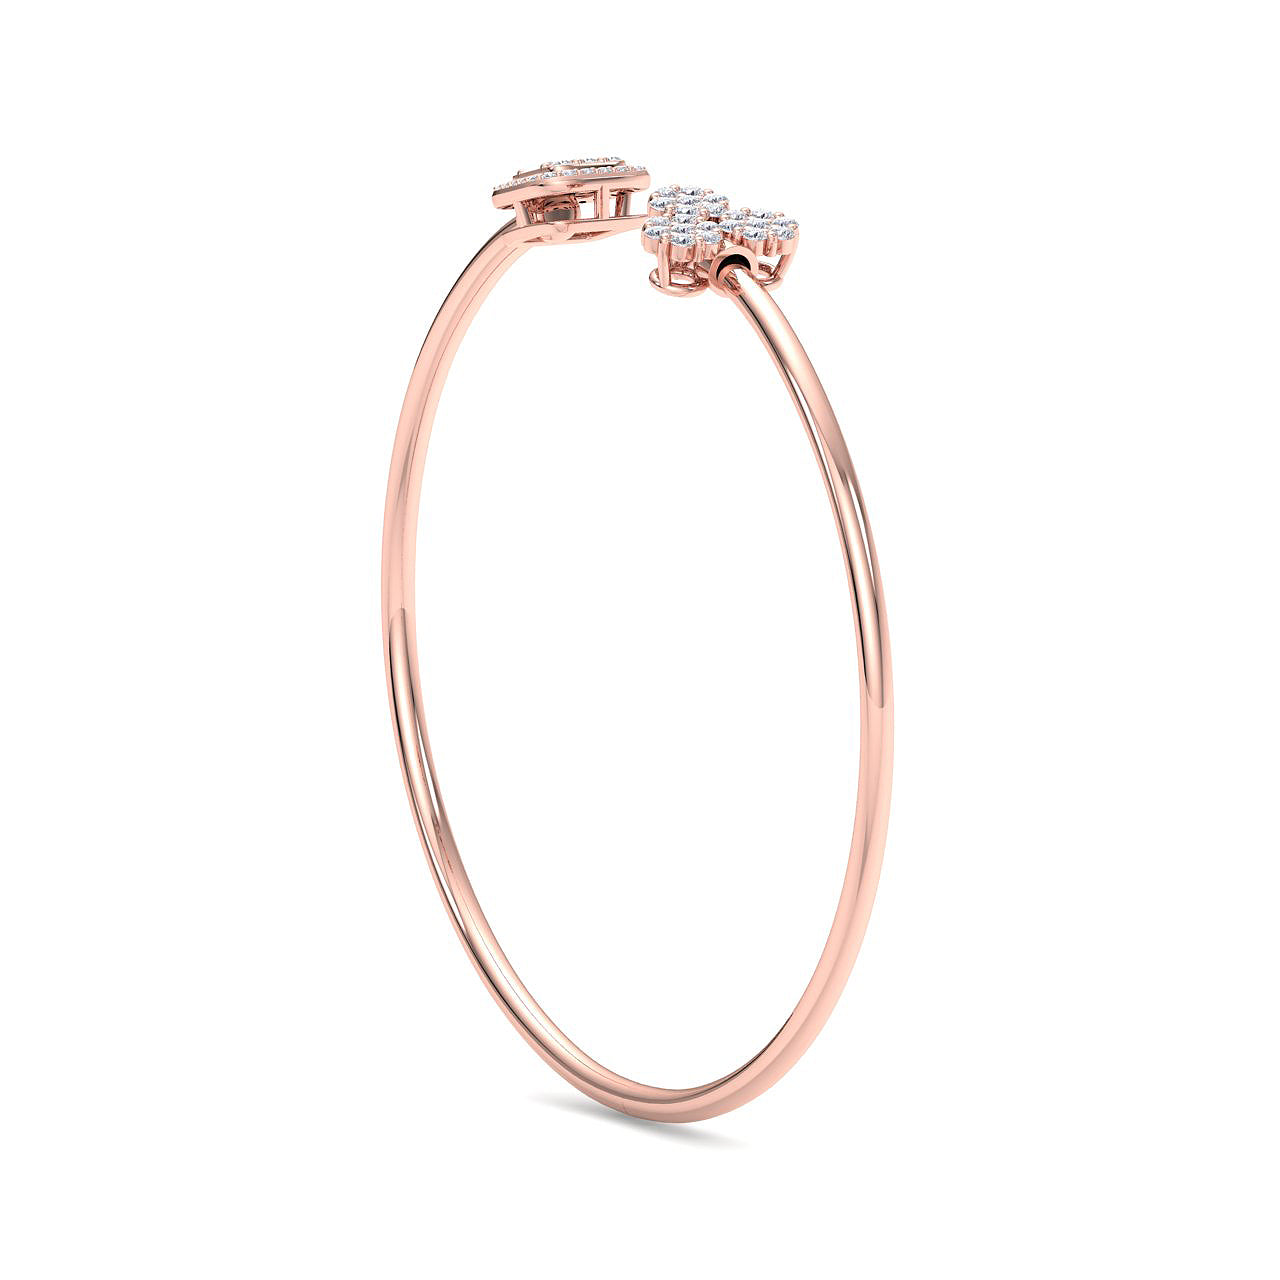 Bracelet in rose gold with white diamonds of 0.58 ct in weight